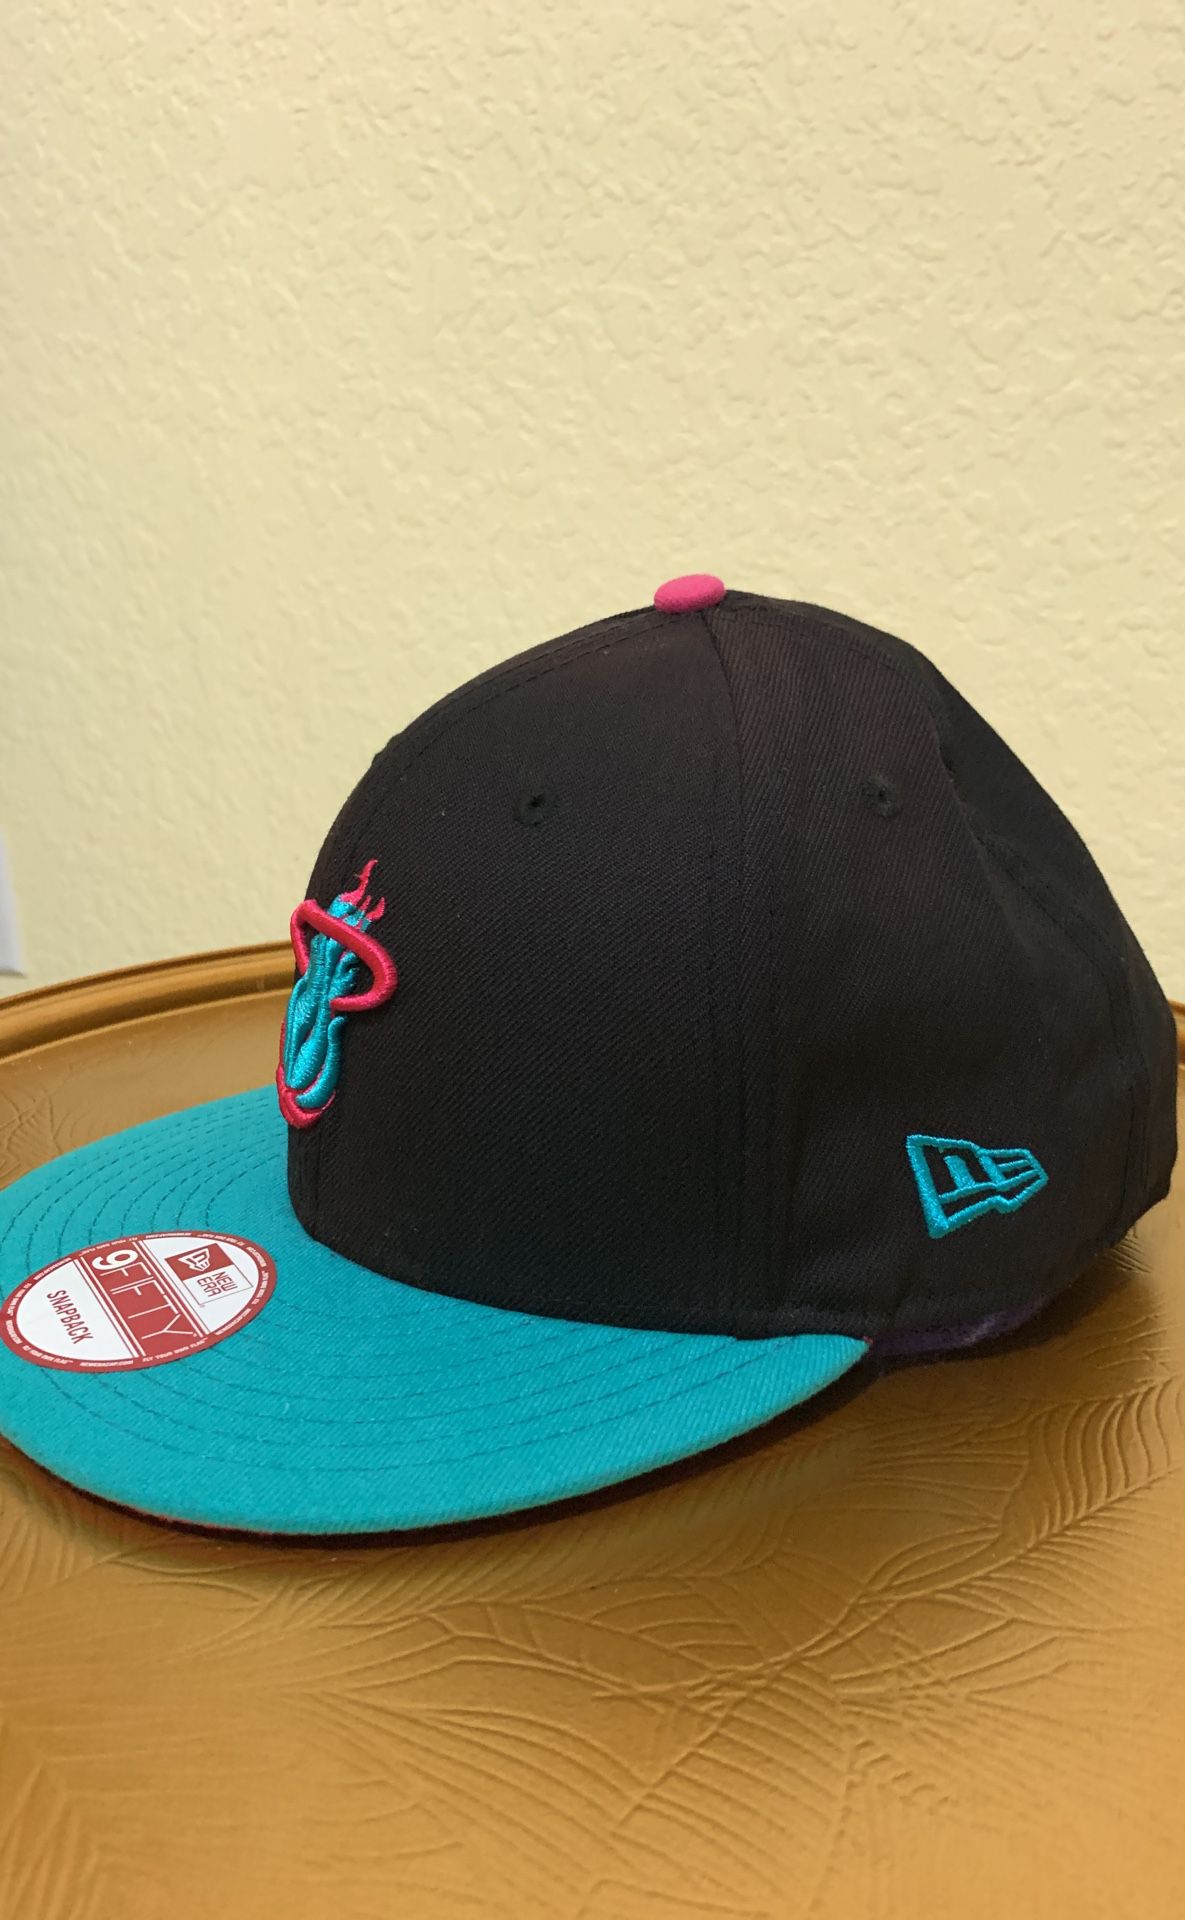 Miami Heat snapback south beach colors for Sale in Fort Lauderdale, FL -  OfferUp